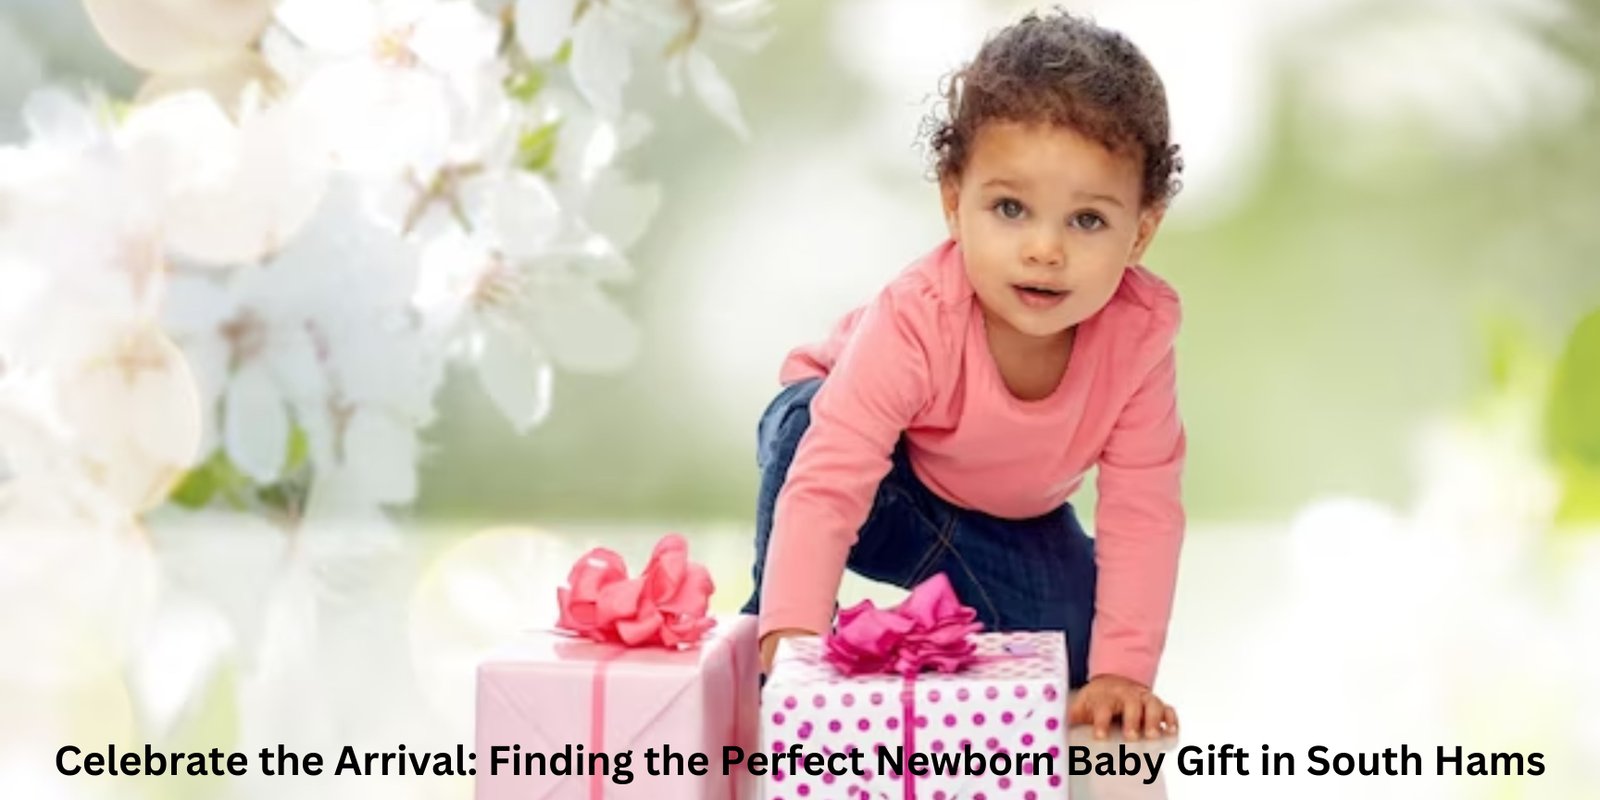 Celebrate the Arrival: Finding the Perfect Newborn Baby Gift in South Hams